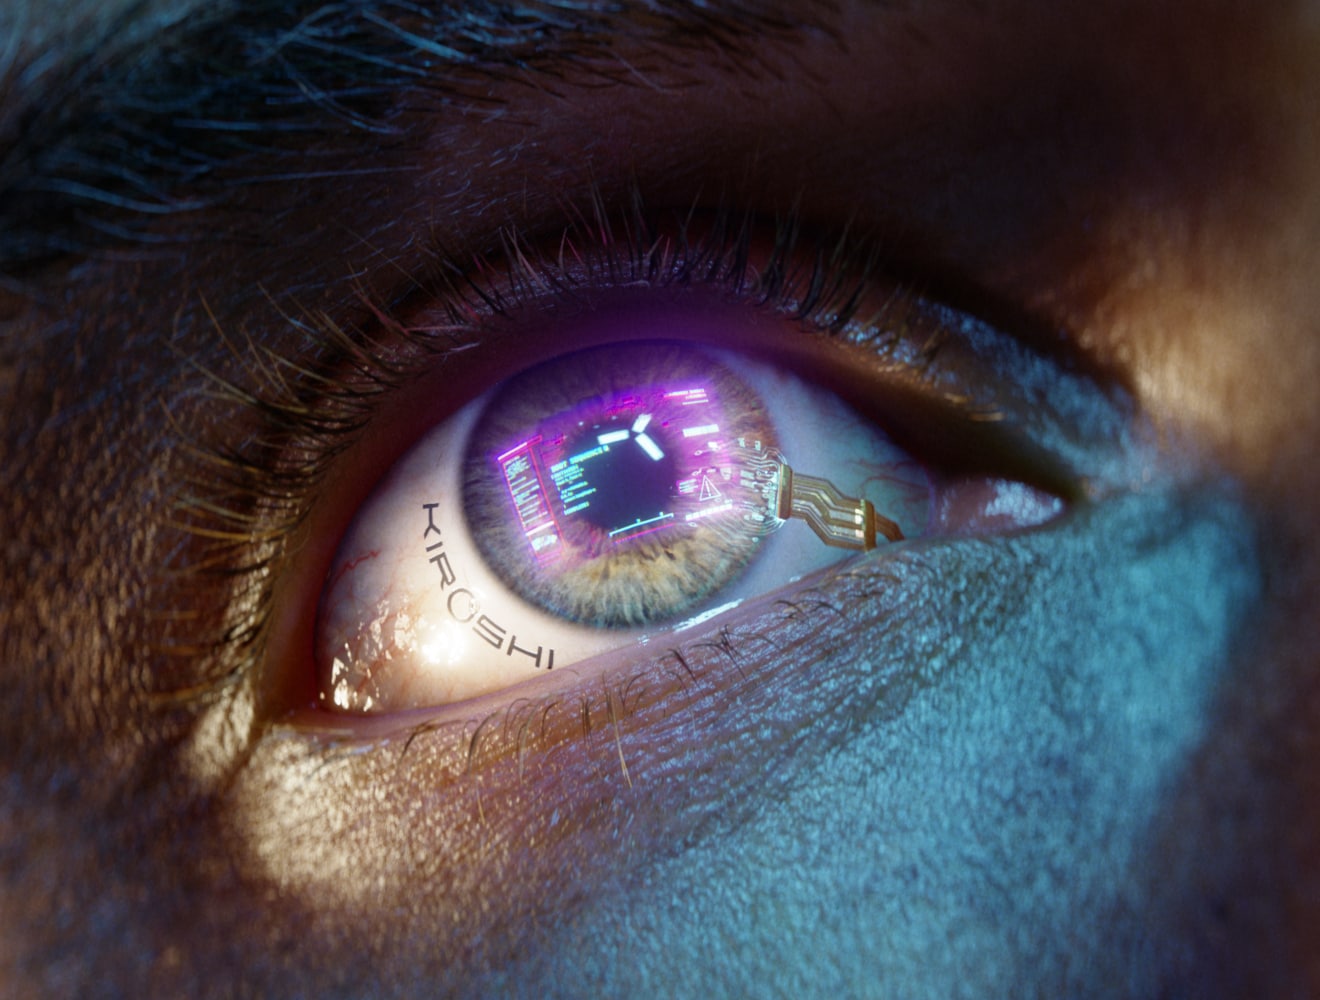 Still of eye and reflection from "Cyberpunk 2077" 